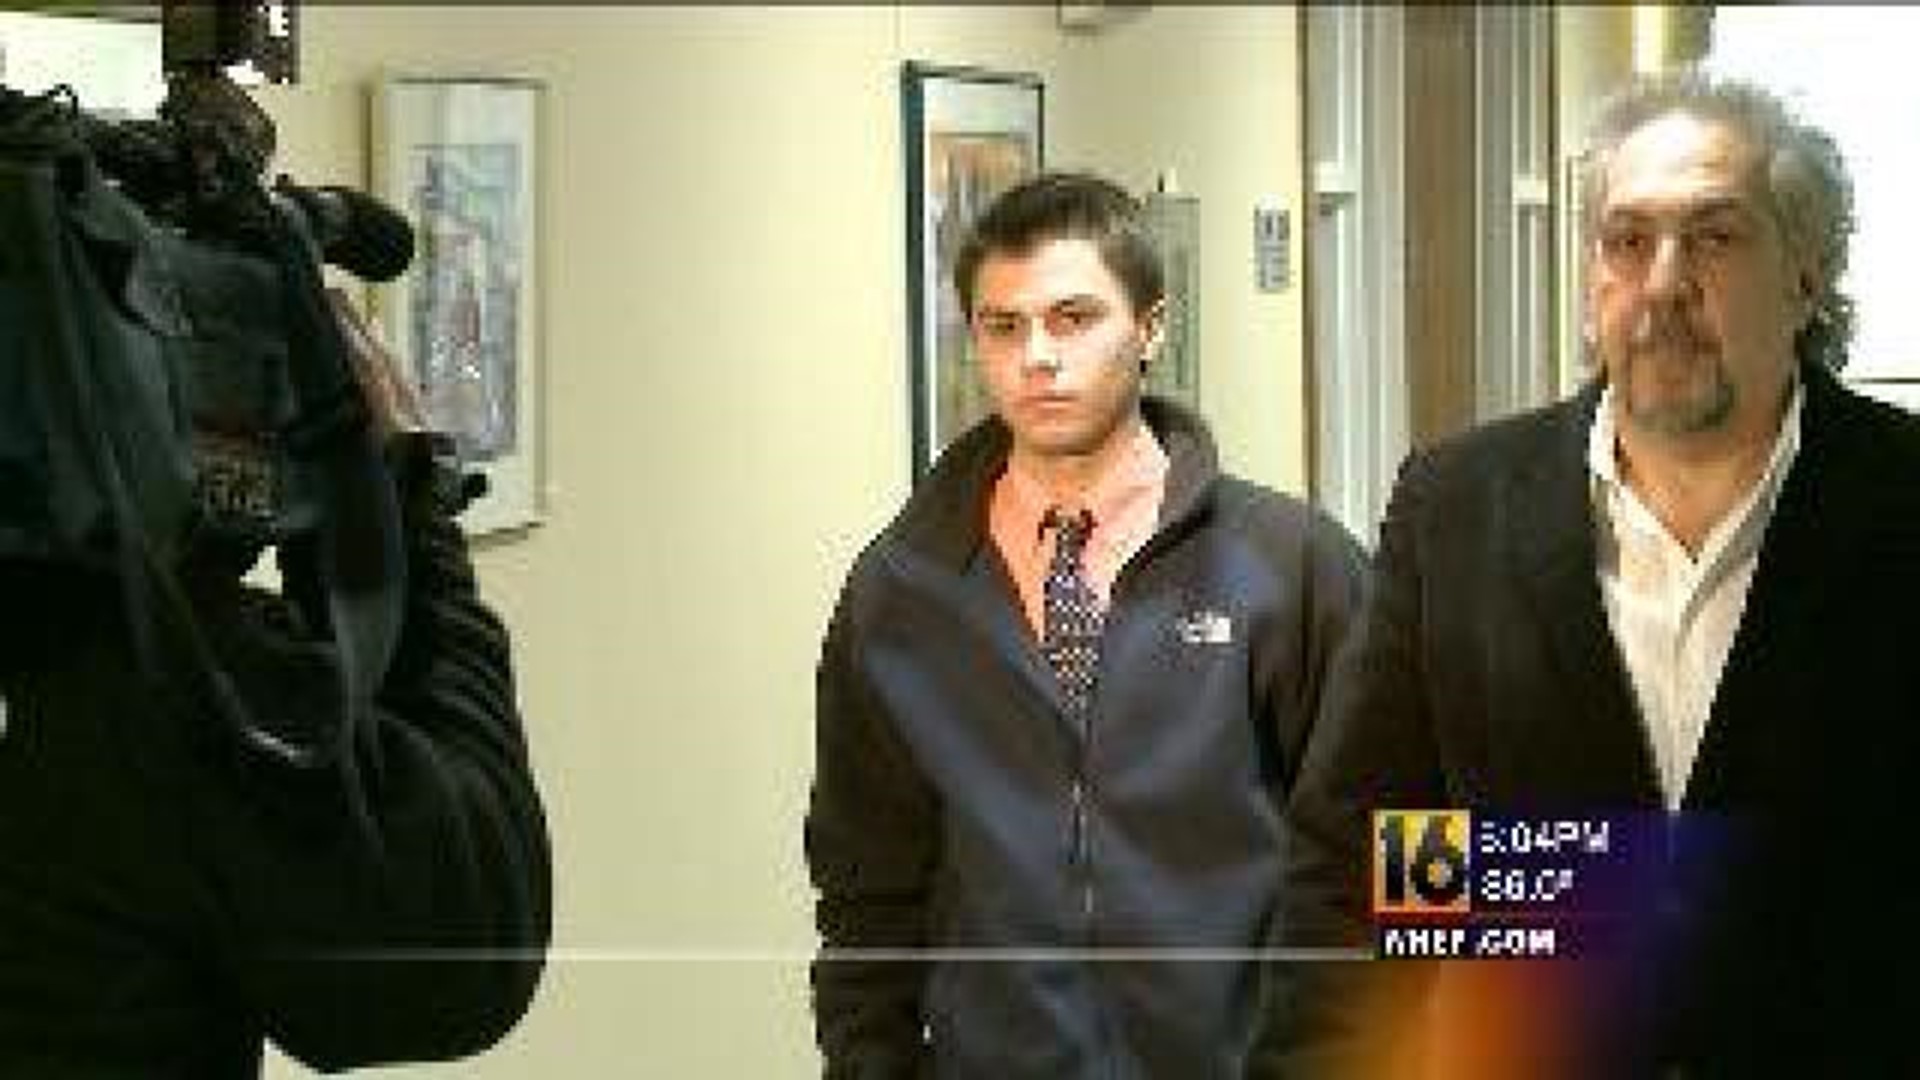 Teen’s Record Cleared After Threats